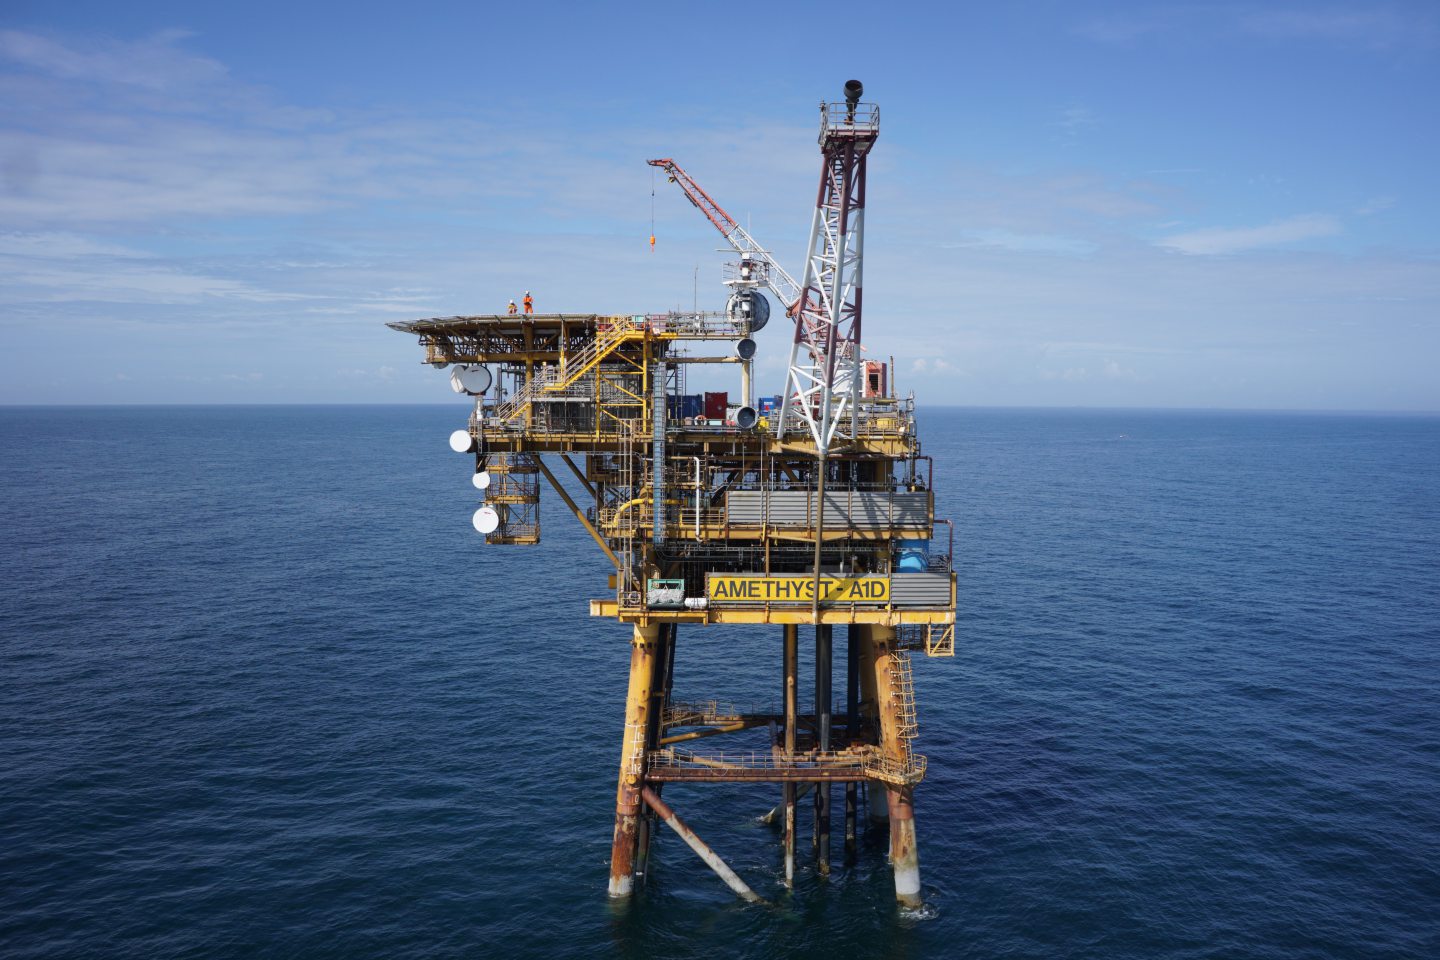 A platform on Perenco's Amethyst field, which will form part of the Orion CCS project